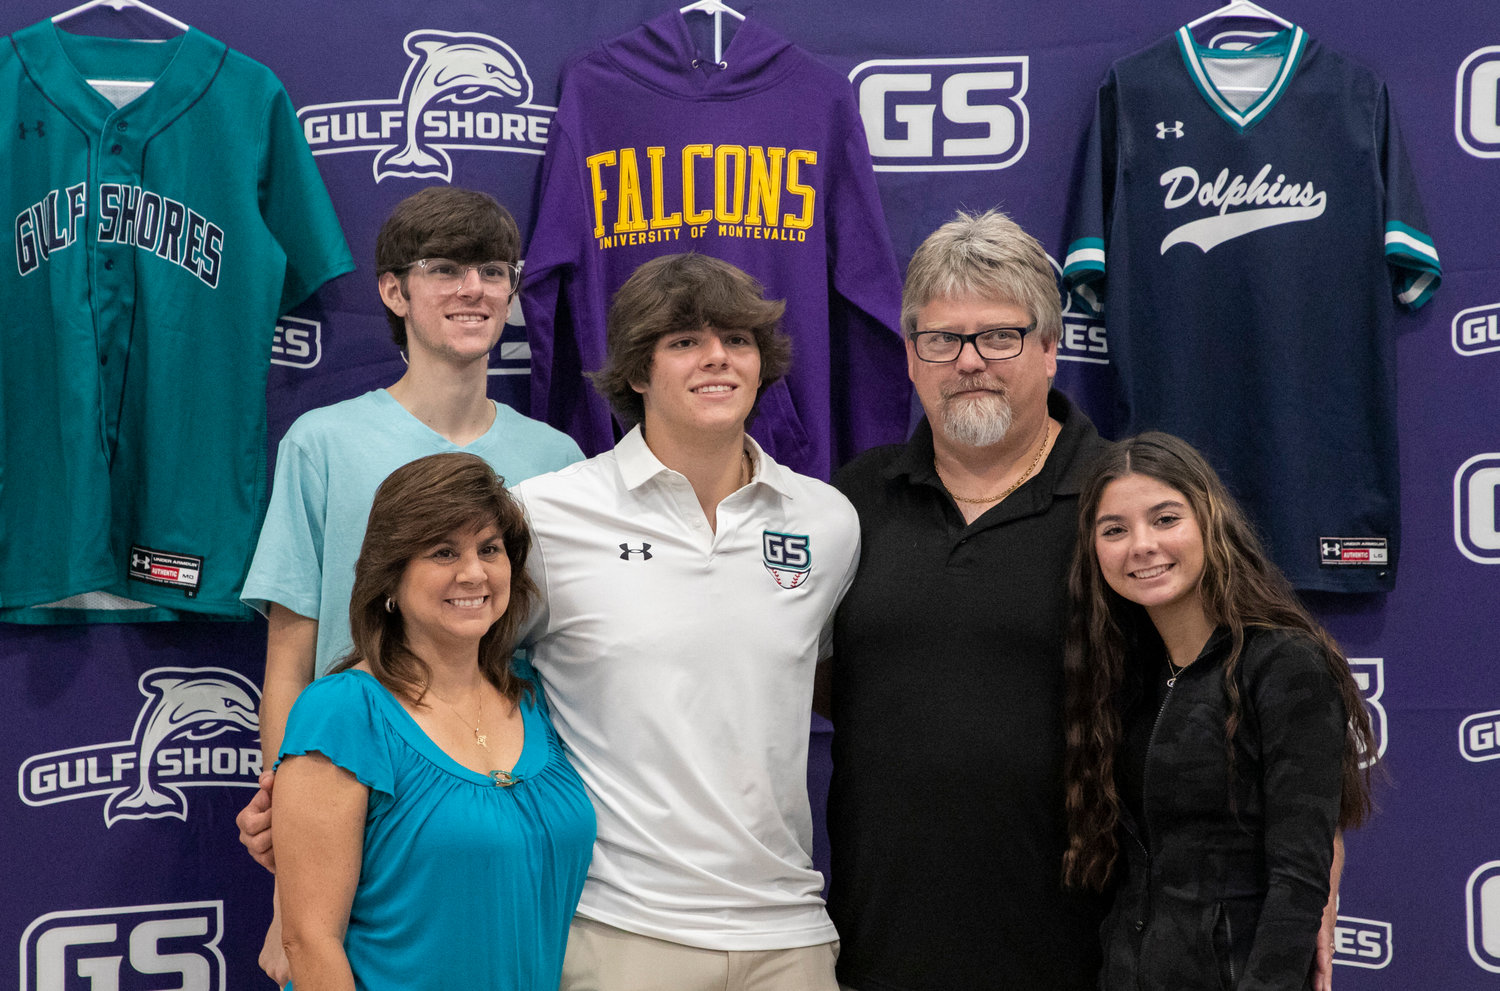 Dominic Maldet was joined by his family in signing his National Letter of Intent to join the Montevallo Falcons baseball team after his senior season at Gulf Shores. The high school hosted a signing ceremony in the gym Wednesday, Dec. 7.